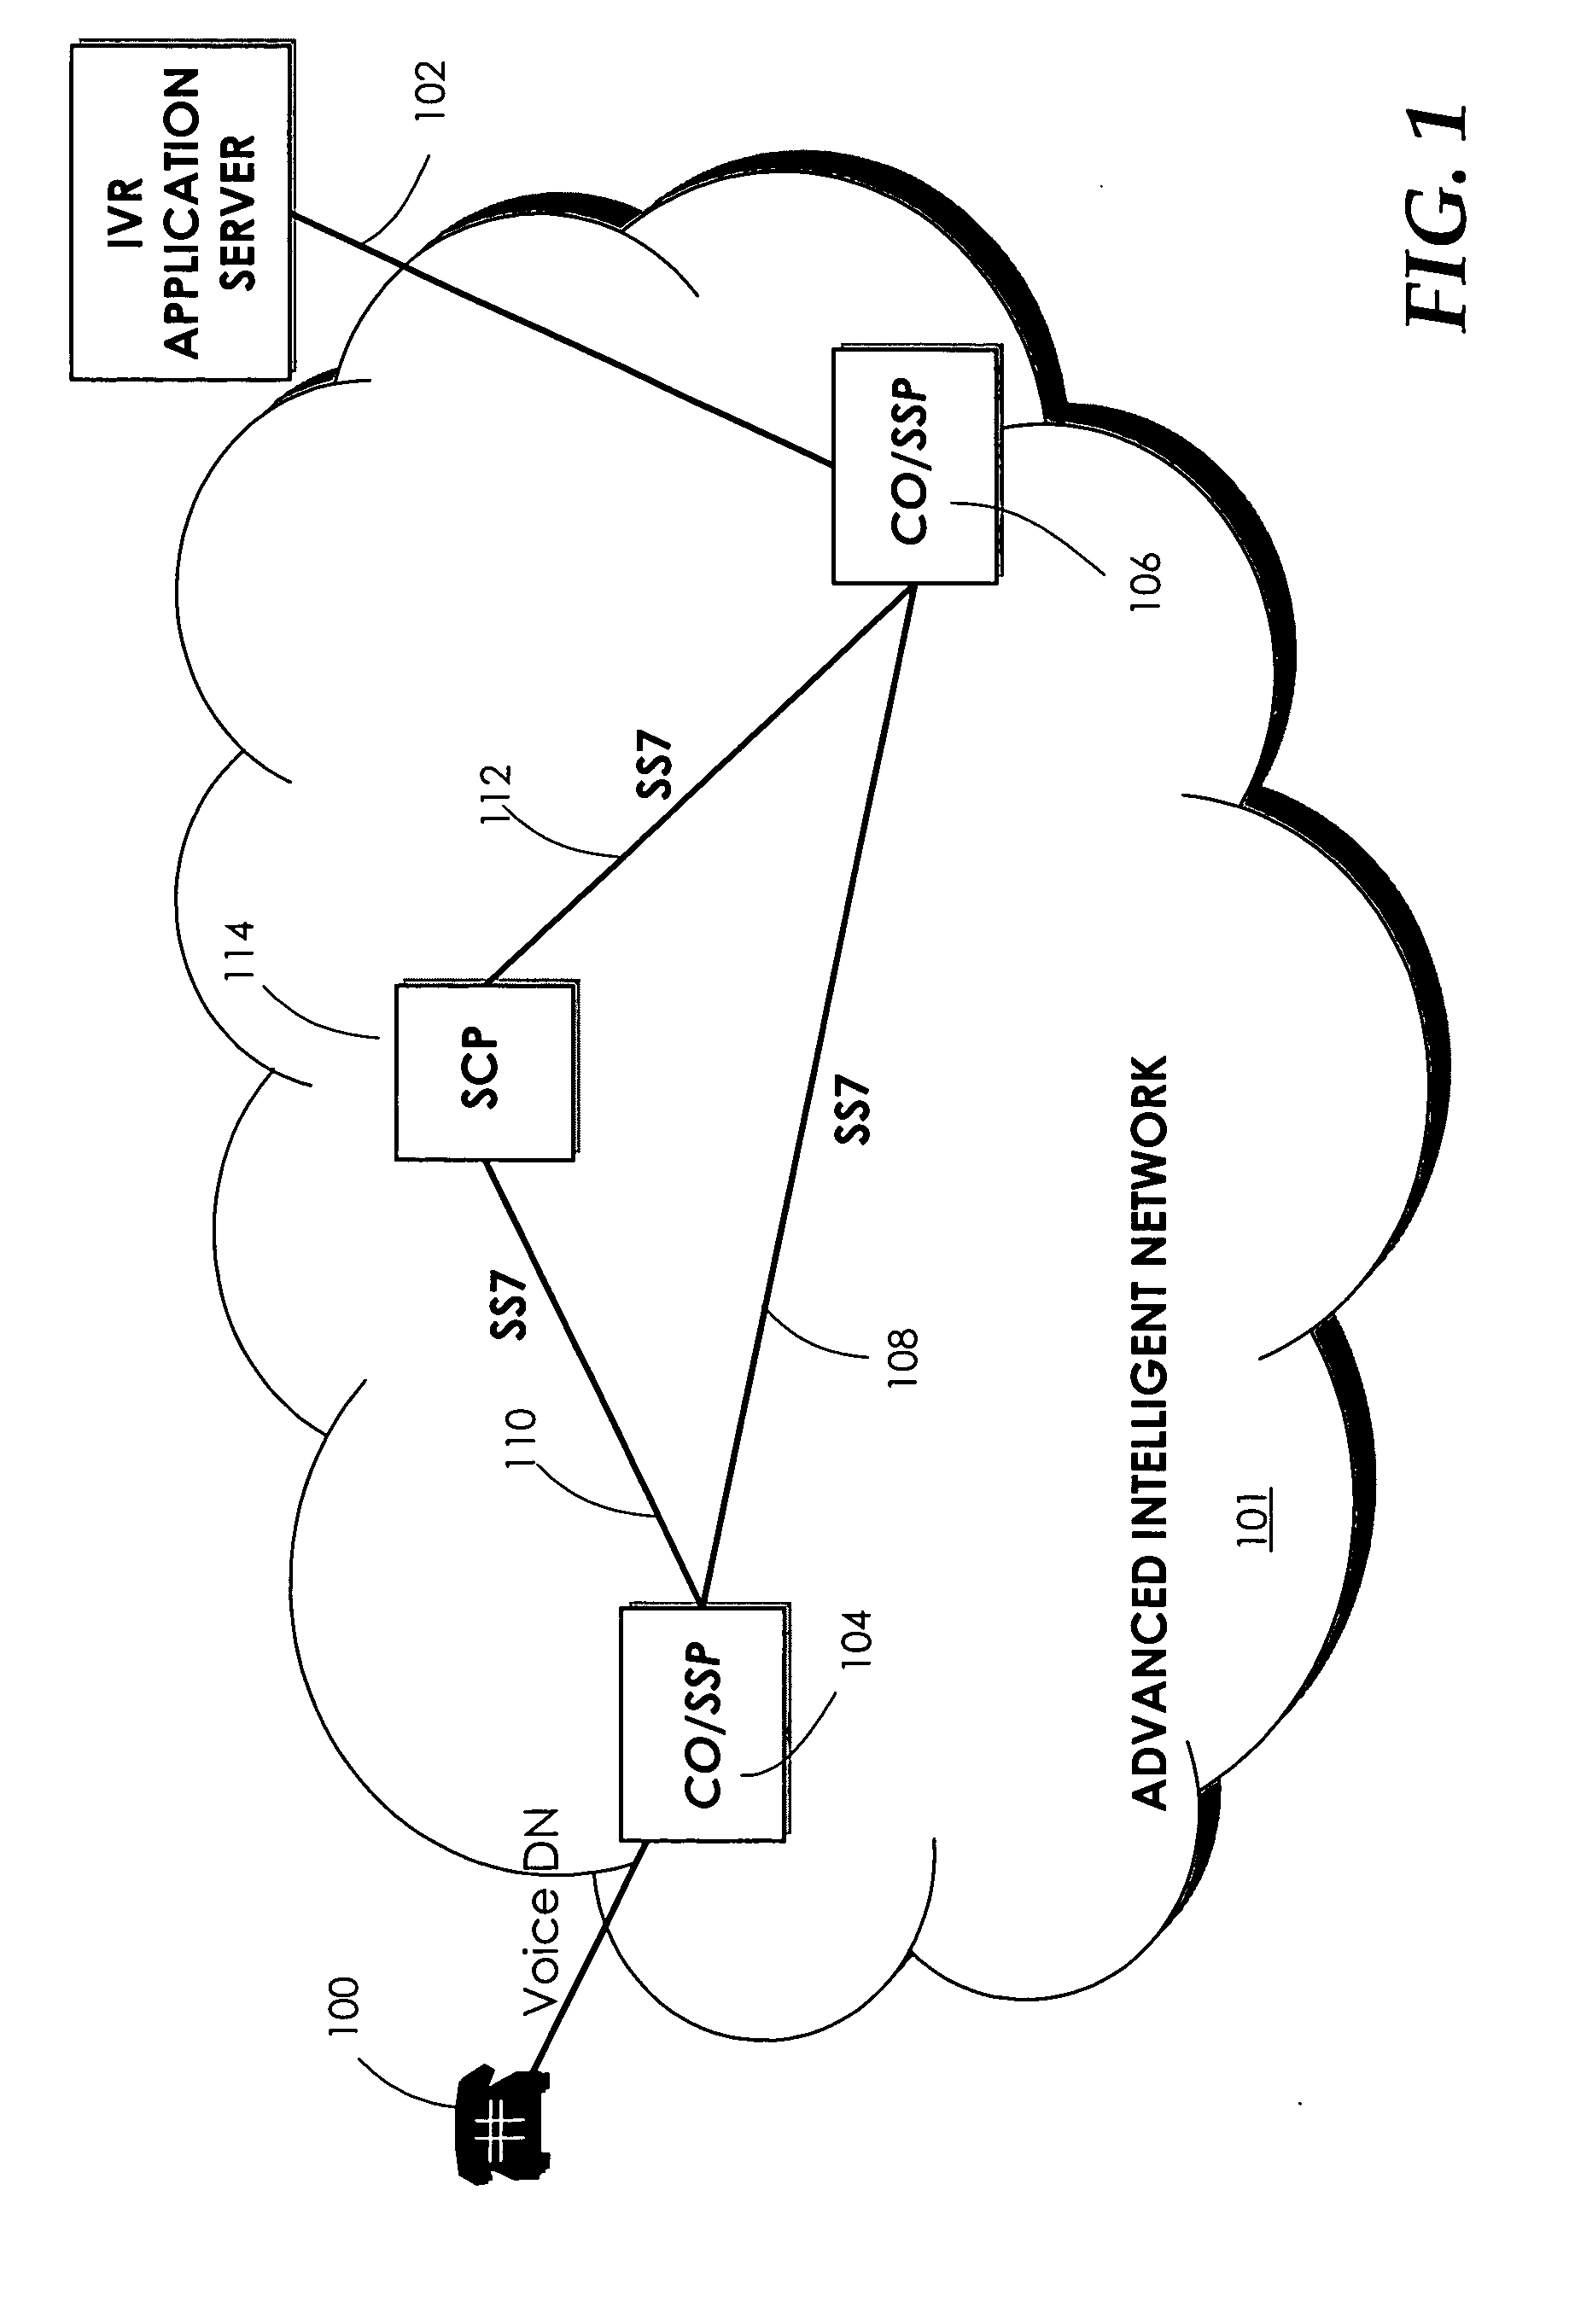 Simultaneous visual and telephonic access to interactive information delivery